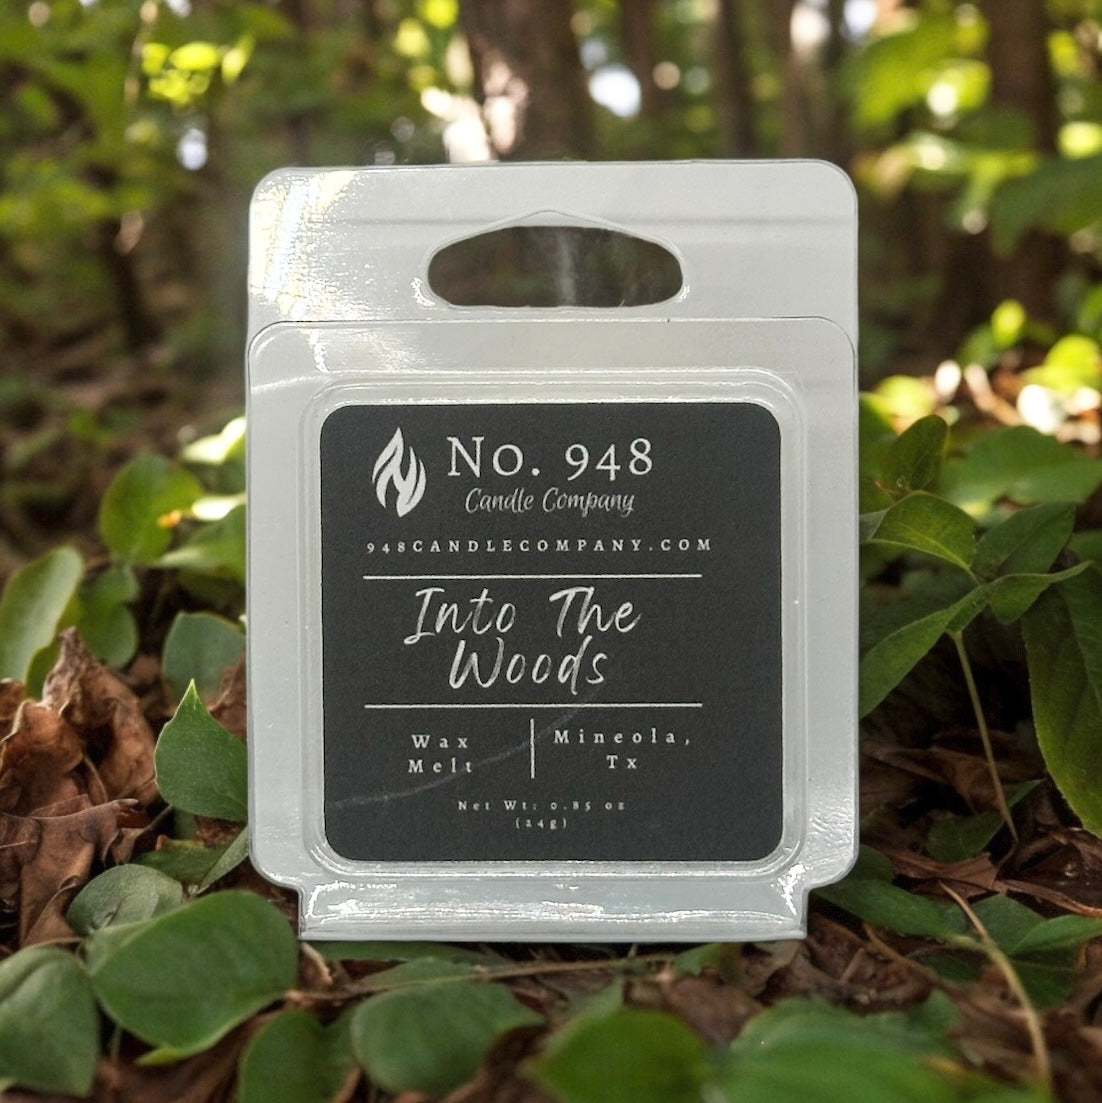 Into The Woods Wax Melt